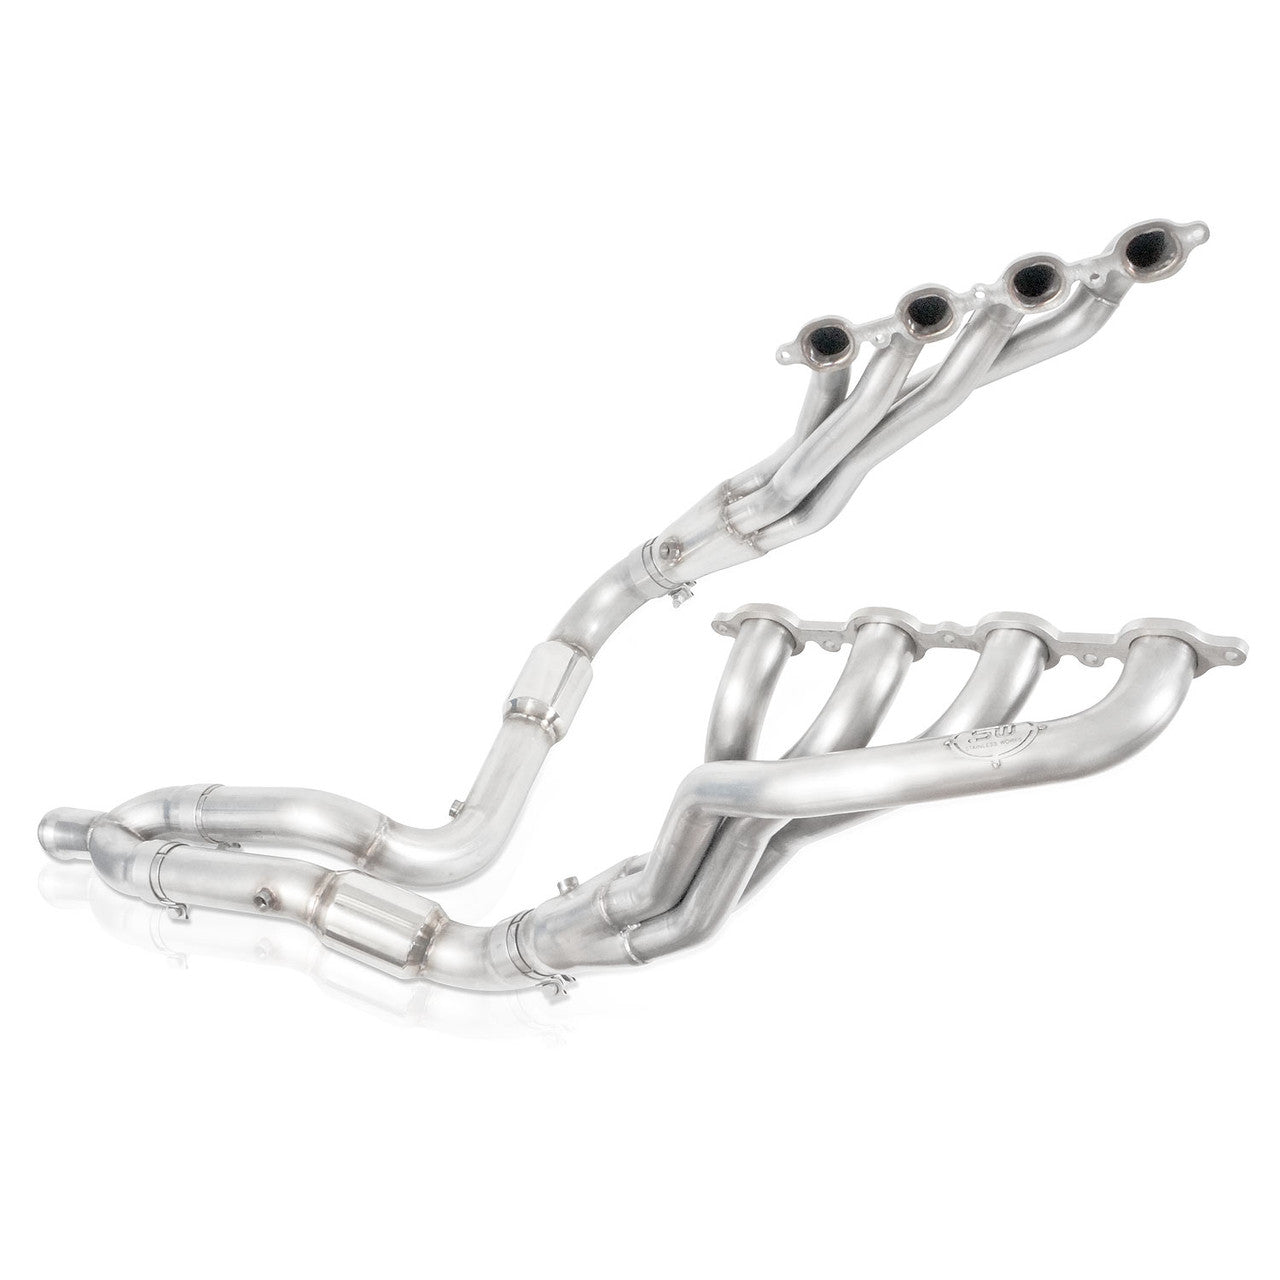 Stainless Works 2014-16 Chevy Silverado/GMC Sierra Headers High-Flow Cats Factory Connection